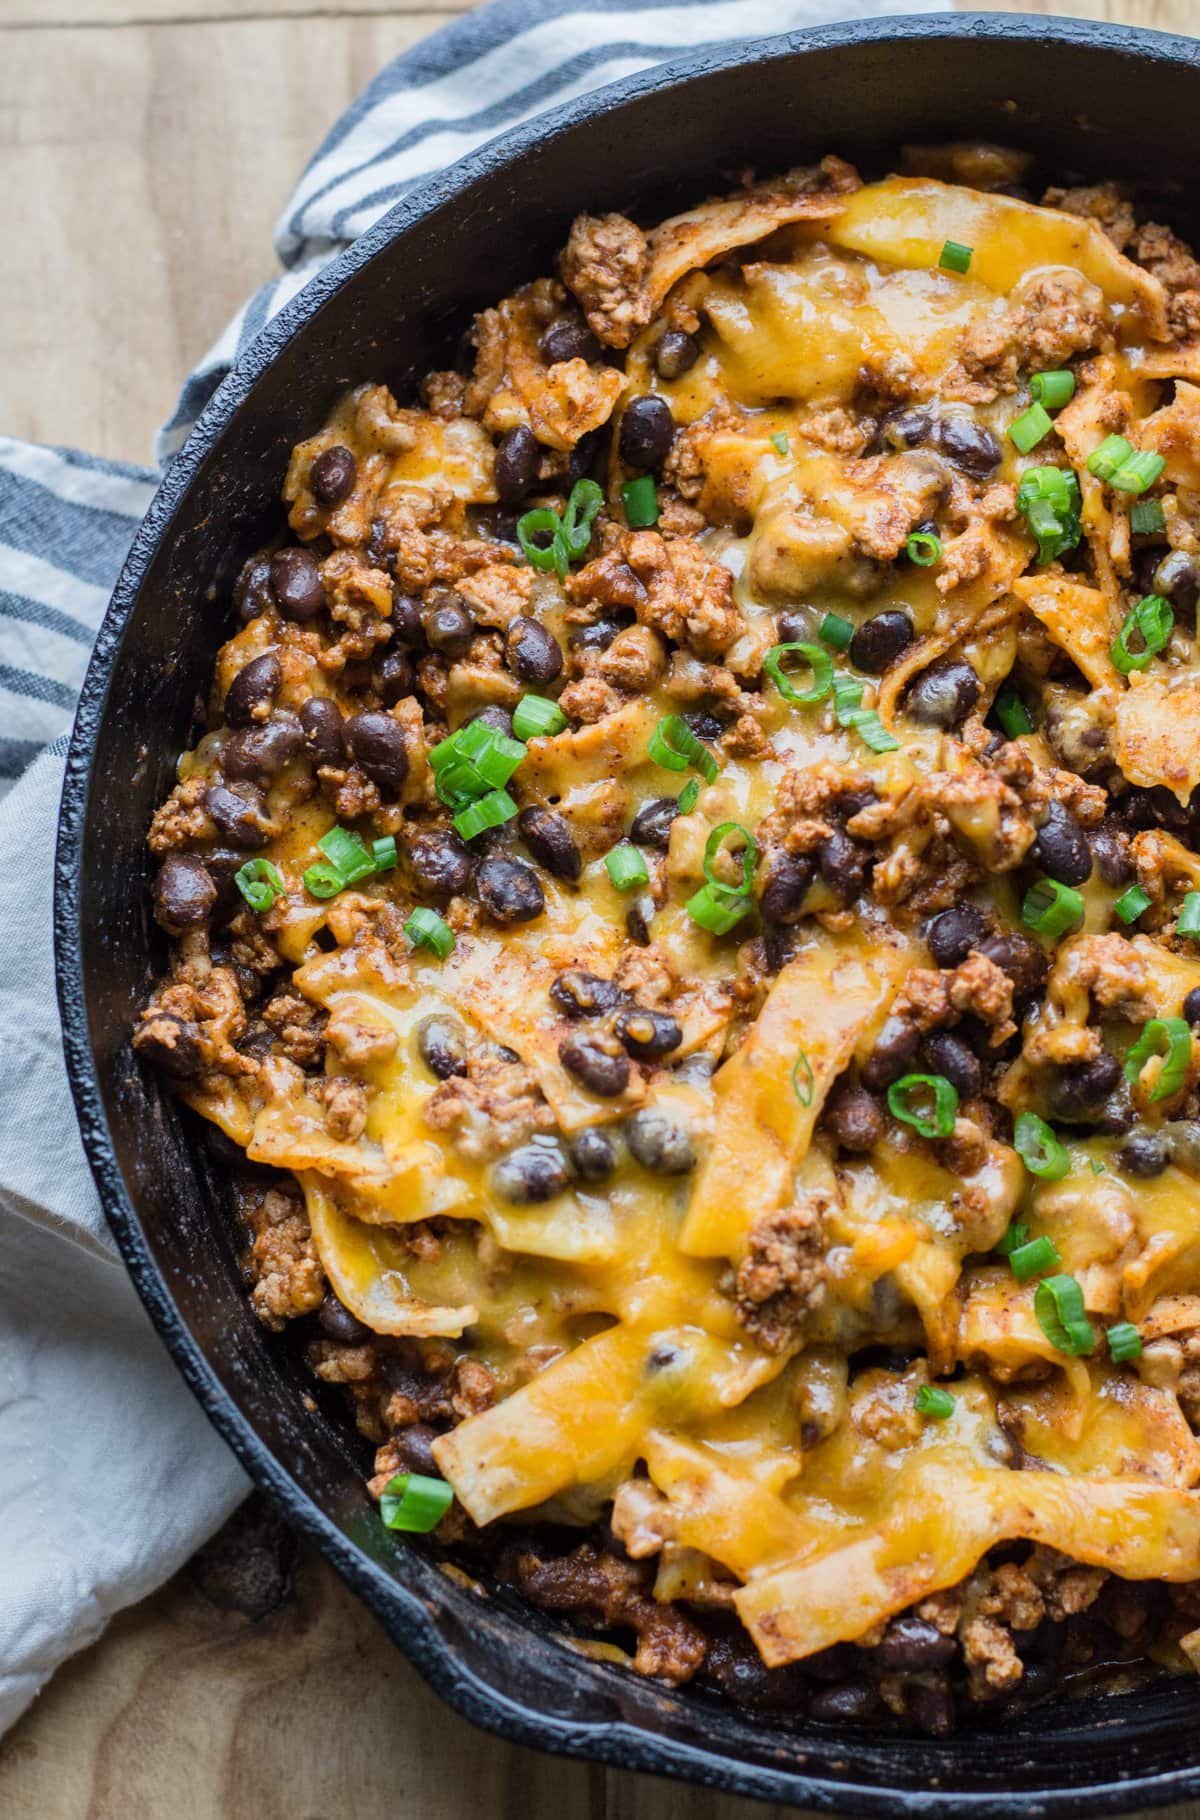 This super easy One Pan Enchilada dish will become a family favorite! Ground beef, black beans, a flavorful enchilada sauce, tortillas and cheese come together for a simple one pan, 20 minute meal! 